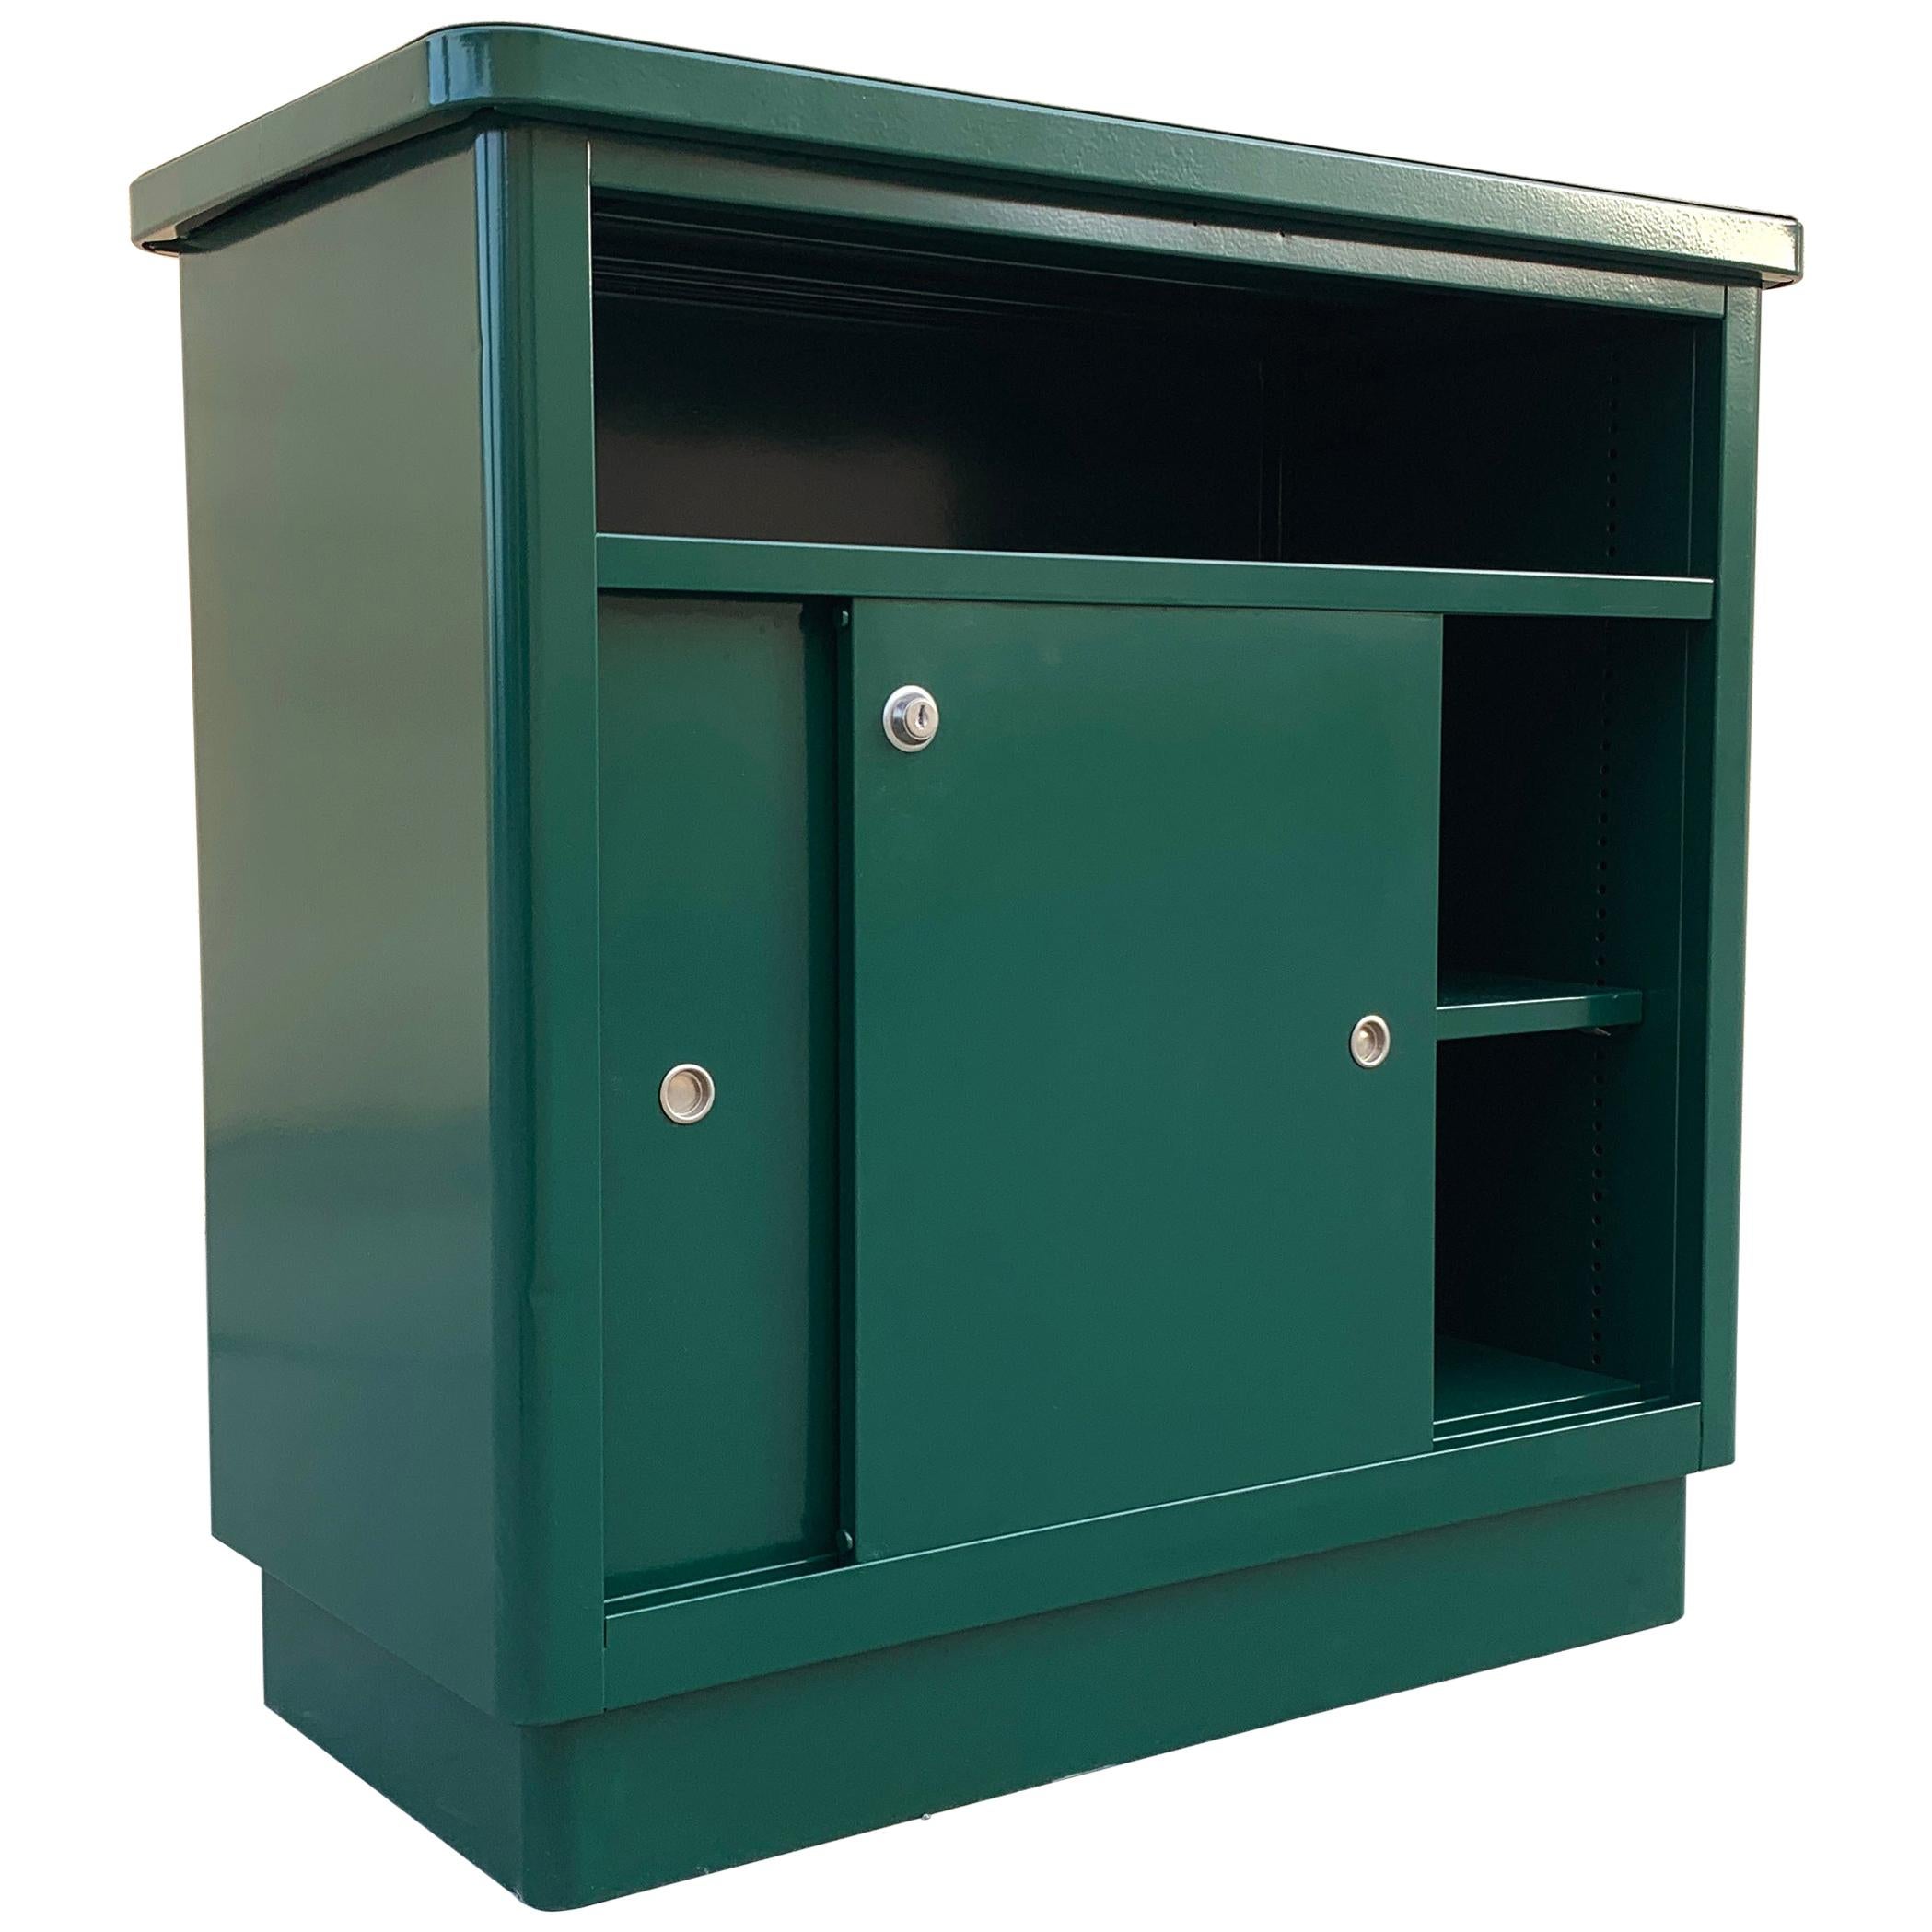 1960s McDowell Craig Steel Tanker Office Cabinet Refinished in Forest Green